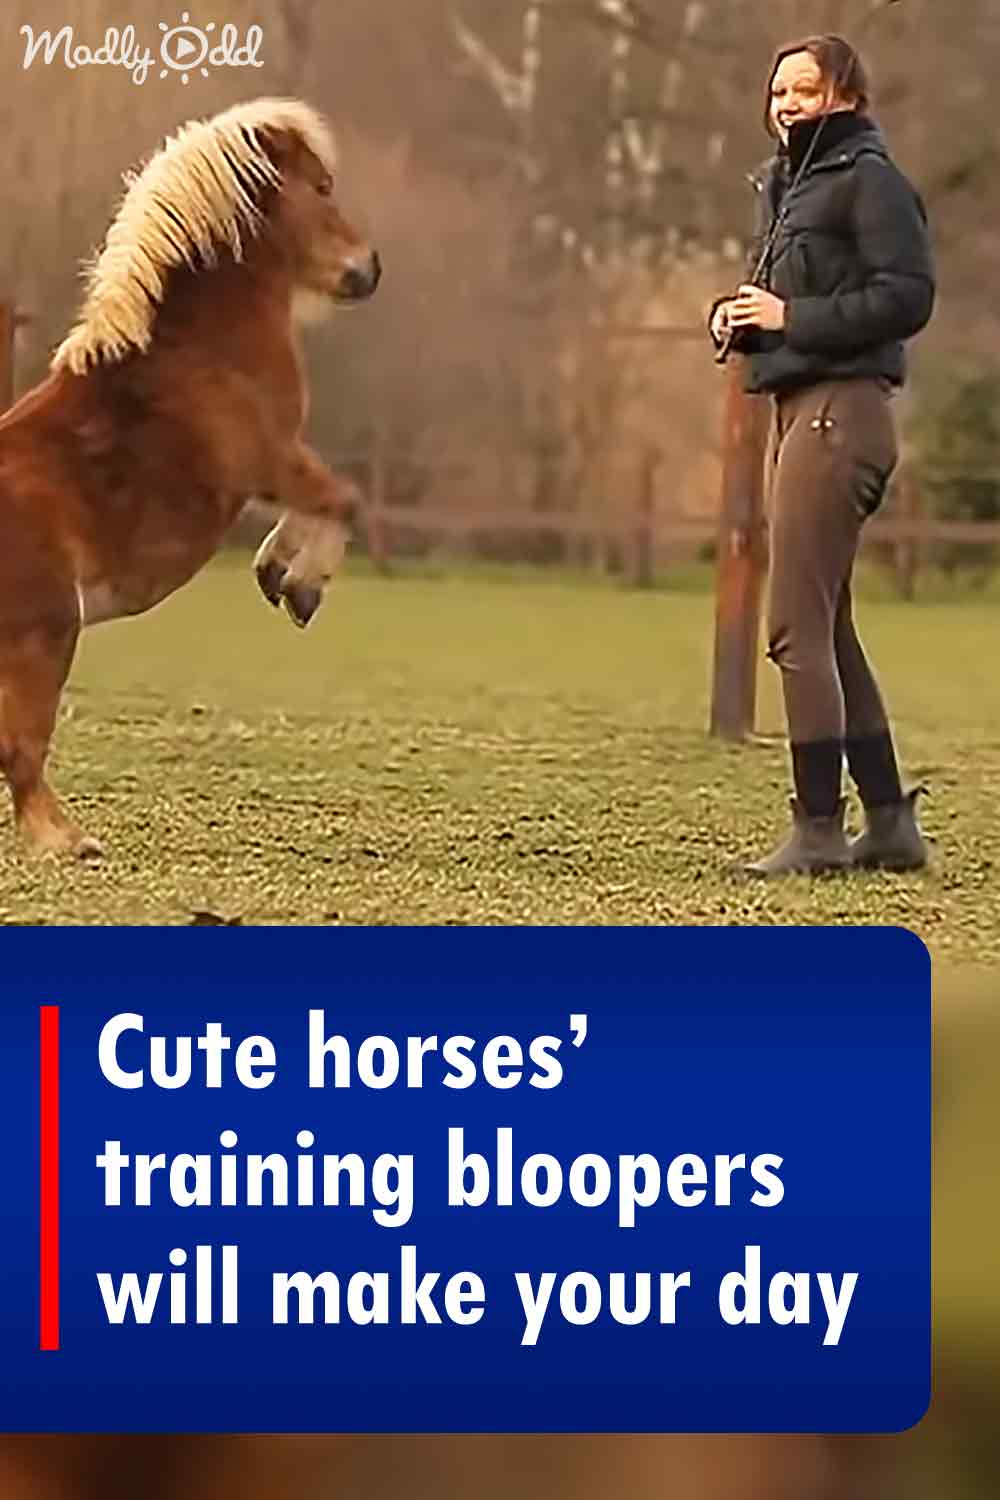 Cute horses’ training bloopers will make your day